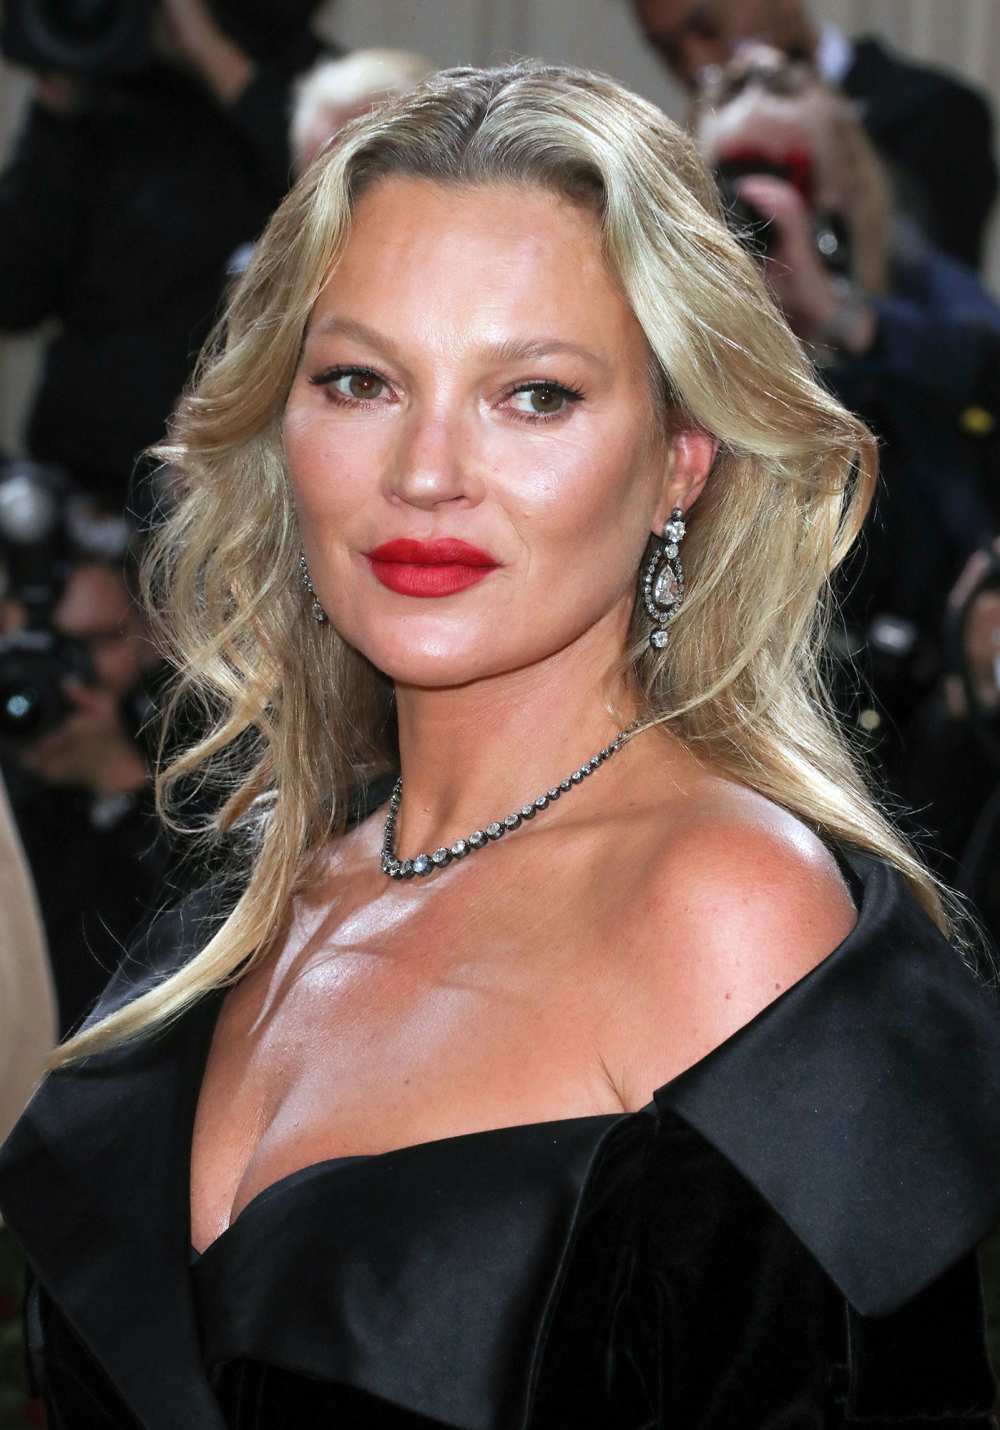 Met Gala 2022: Kate Moss’ Skin and Makeup Prep, Products